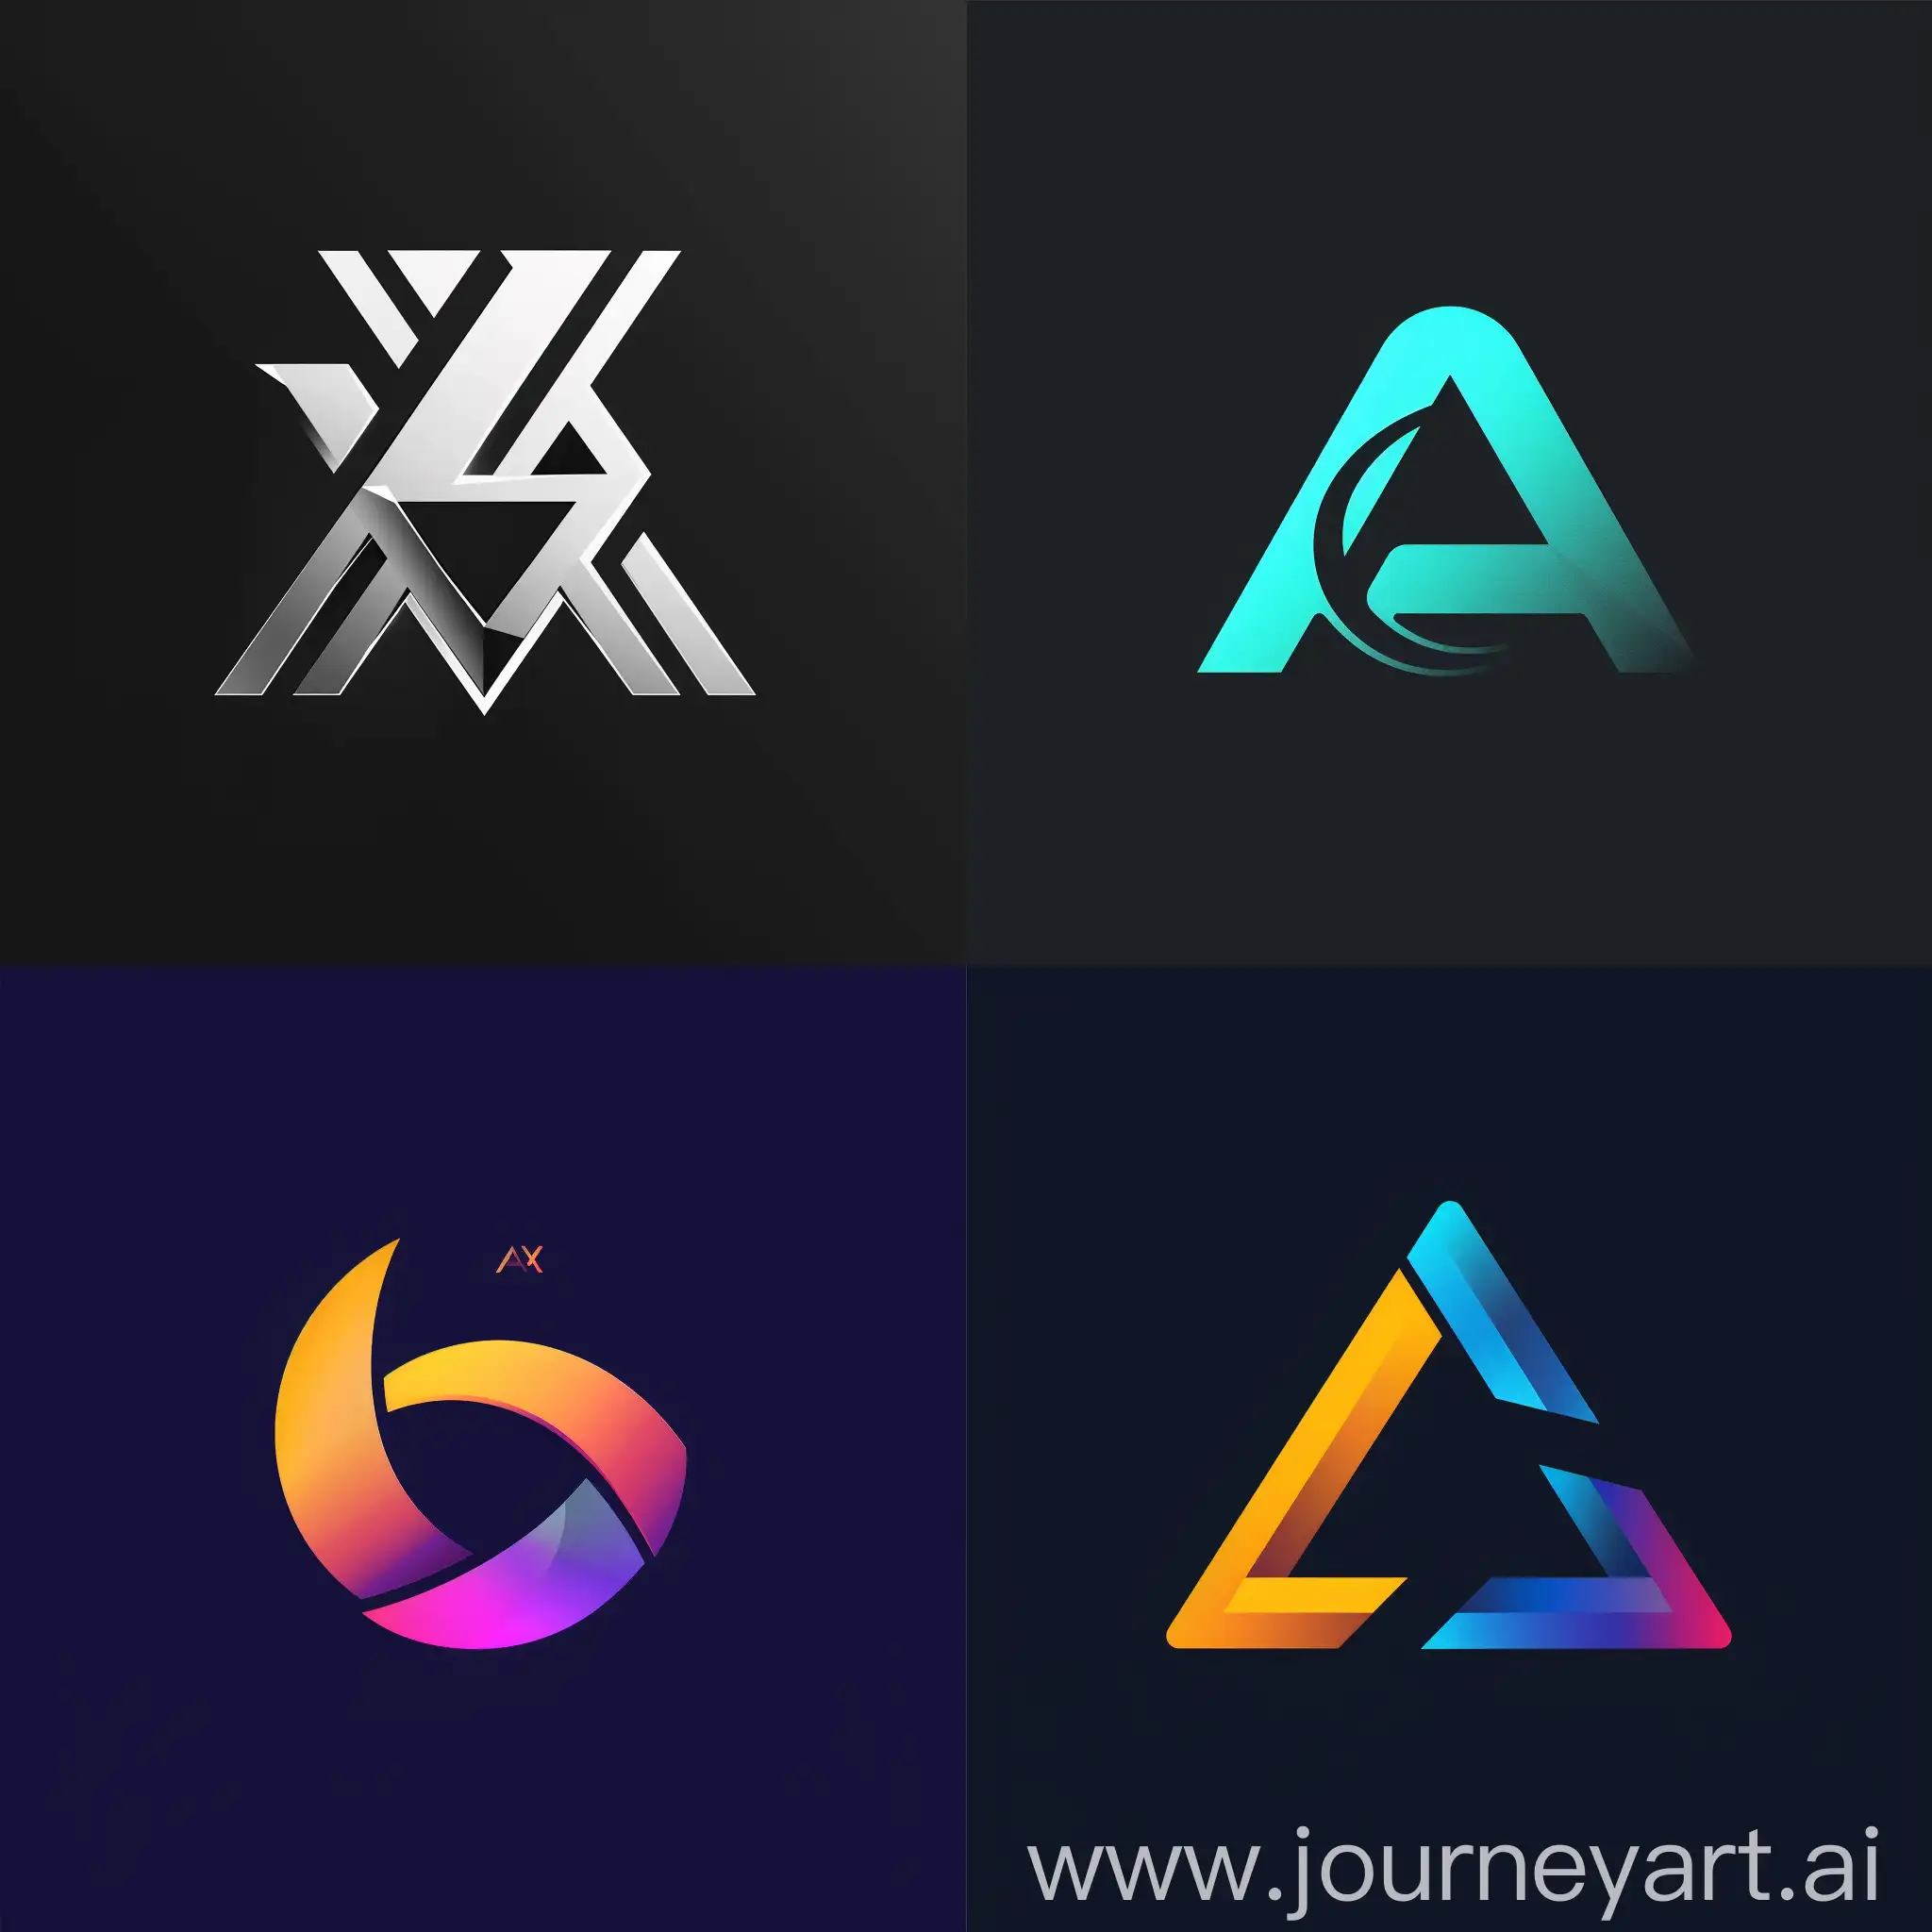 Futuristic-and-Clean-Logo-Design-for-Online-Shop-AkylStore